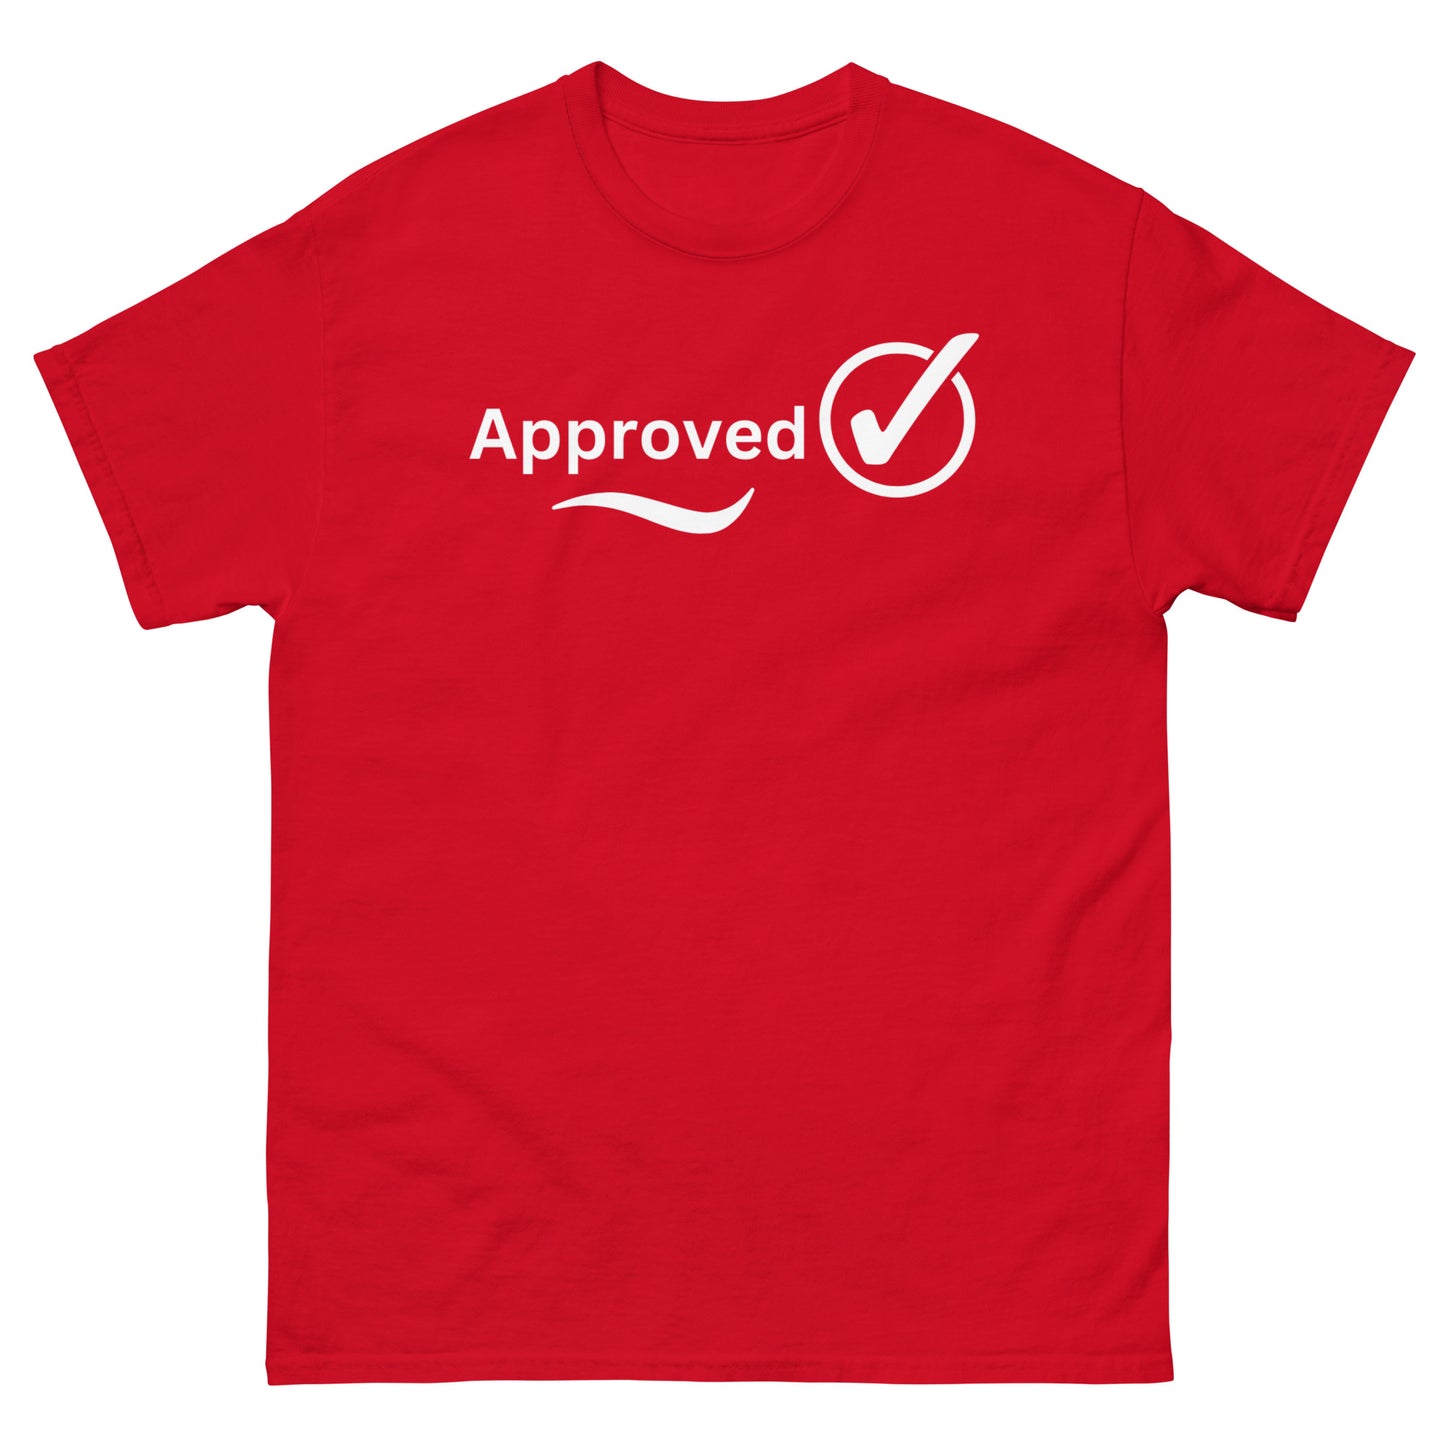 Approved T-shirt